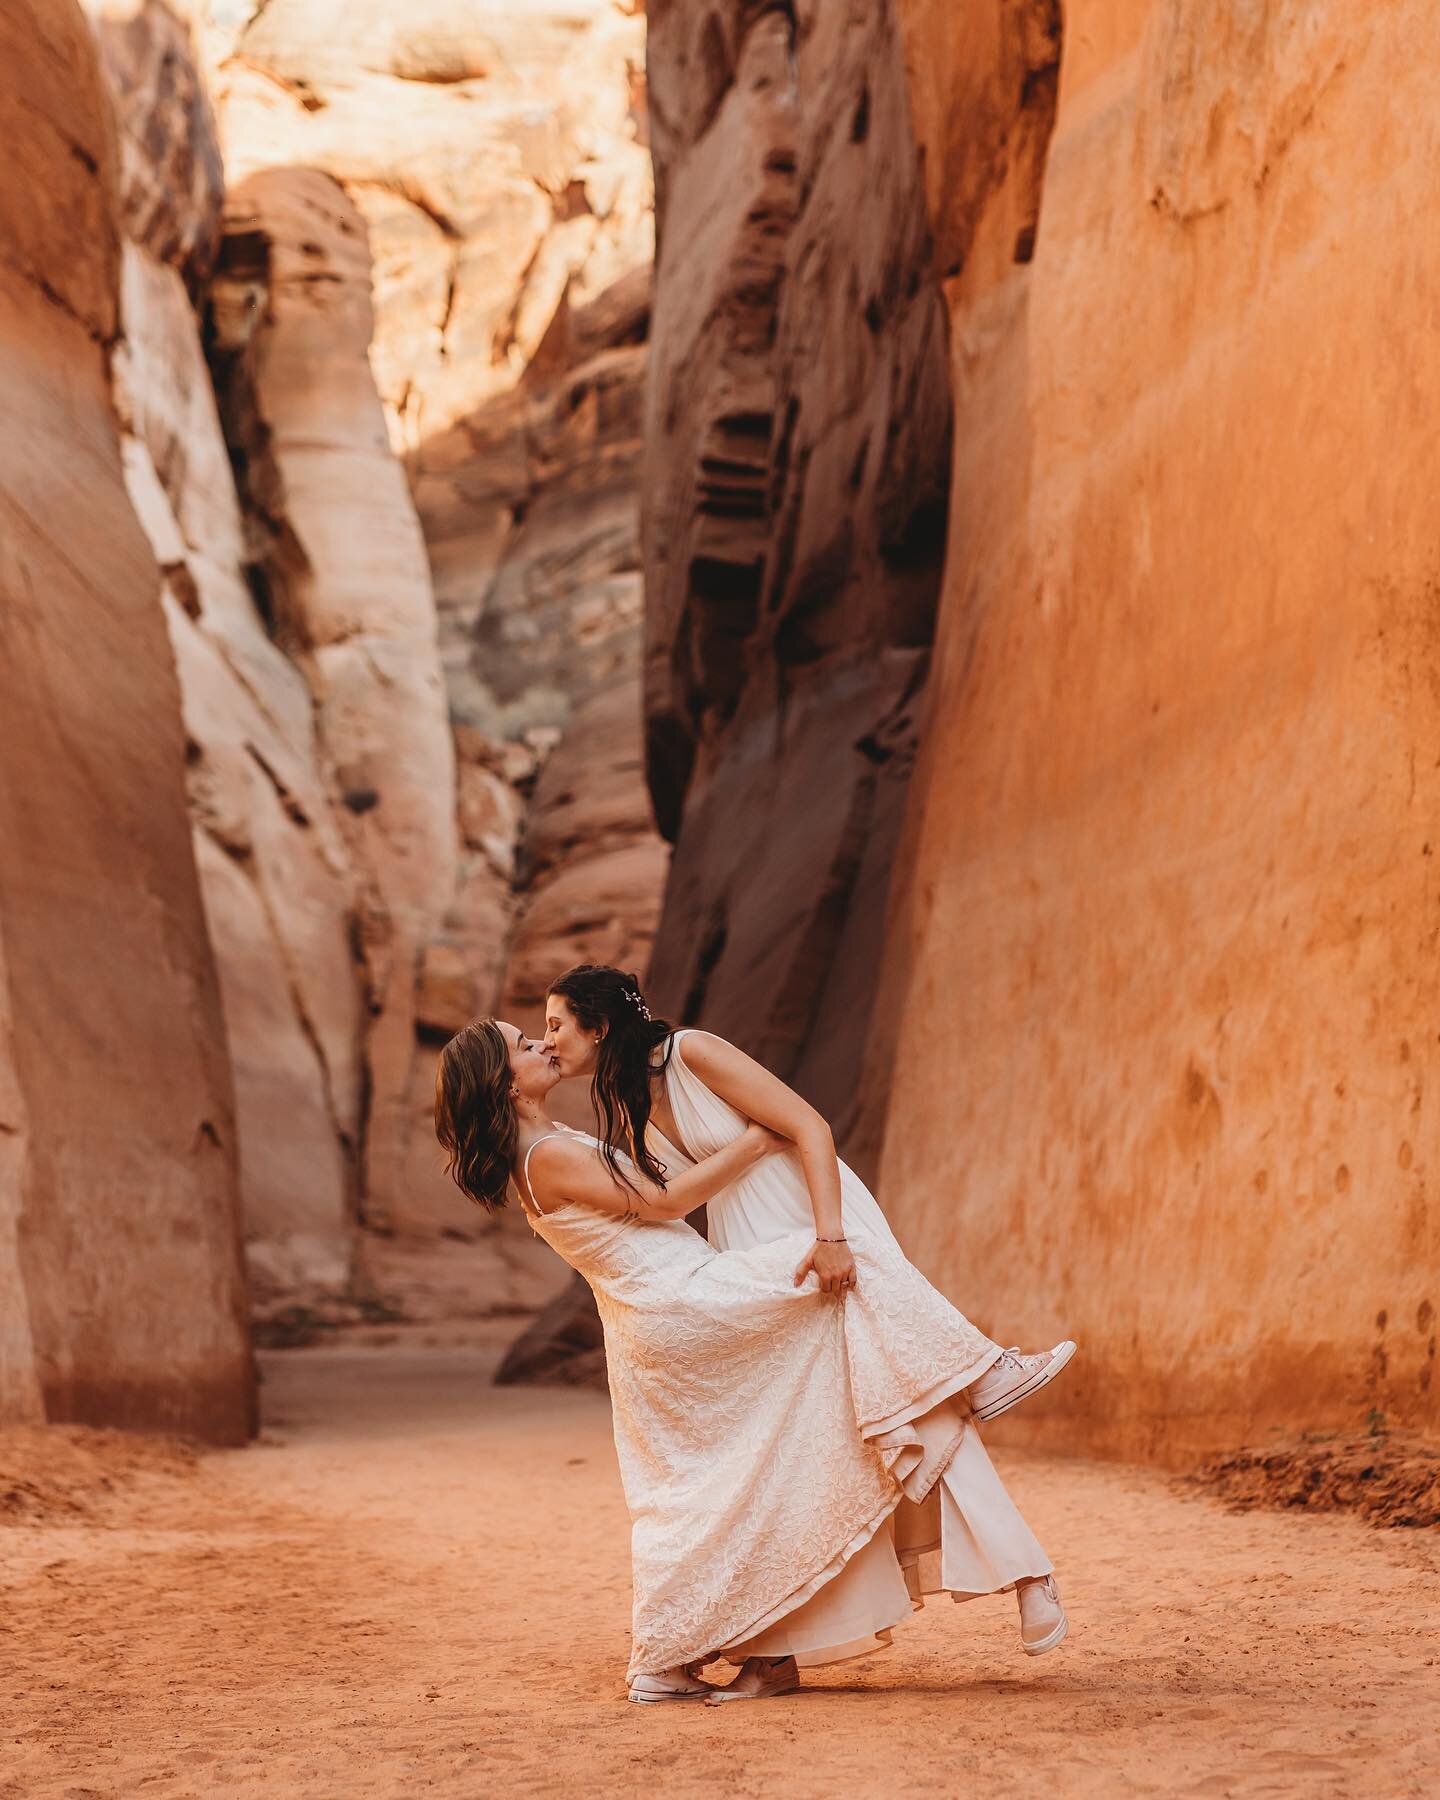 These two badasses spent the afternoon of their wedding day kayaking 3 miles into a slot canyon&hellip; while wearing their wedding dresses! It doesn&rsquo;t get much more adventurous than that 💪🏻🎉

#lookslikefilmweddings #lookslikefilm #wandering